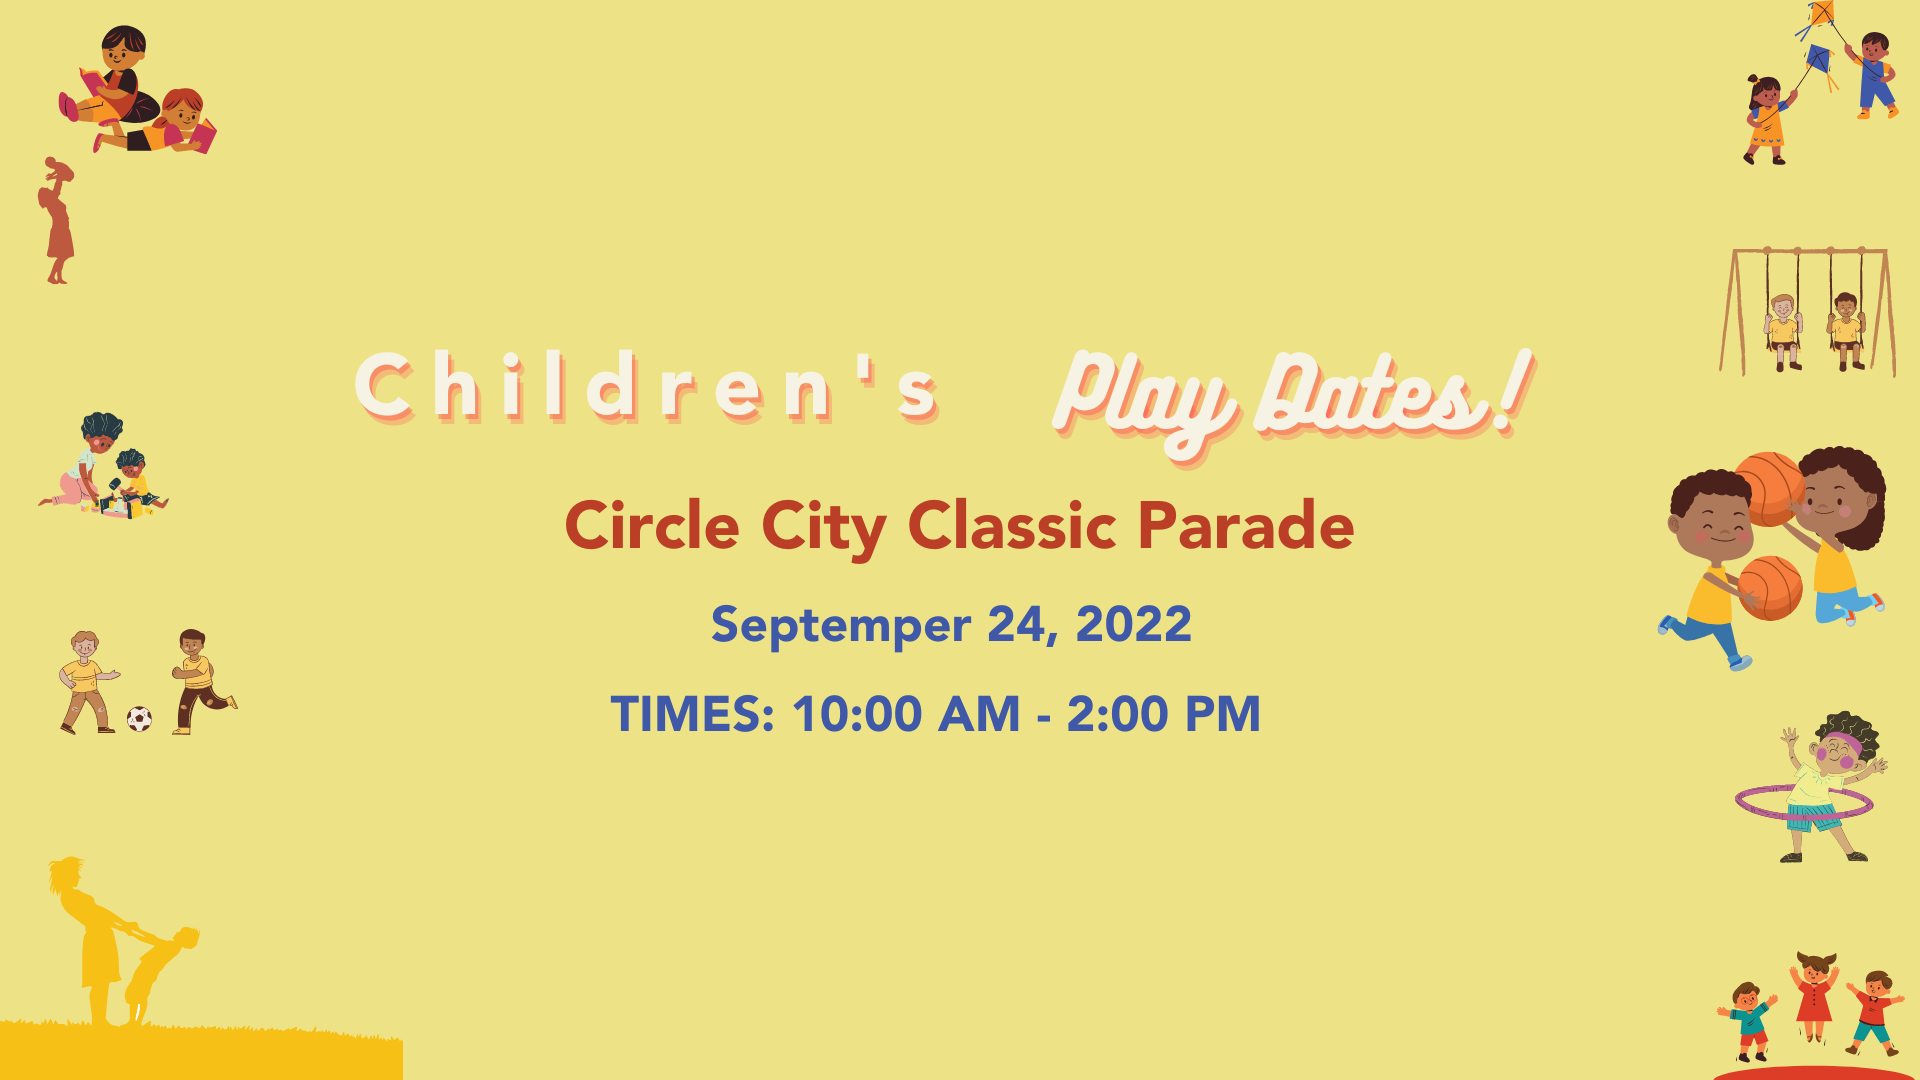 Children's Play Date Circle City Classic Parade